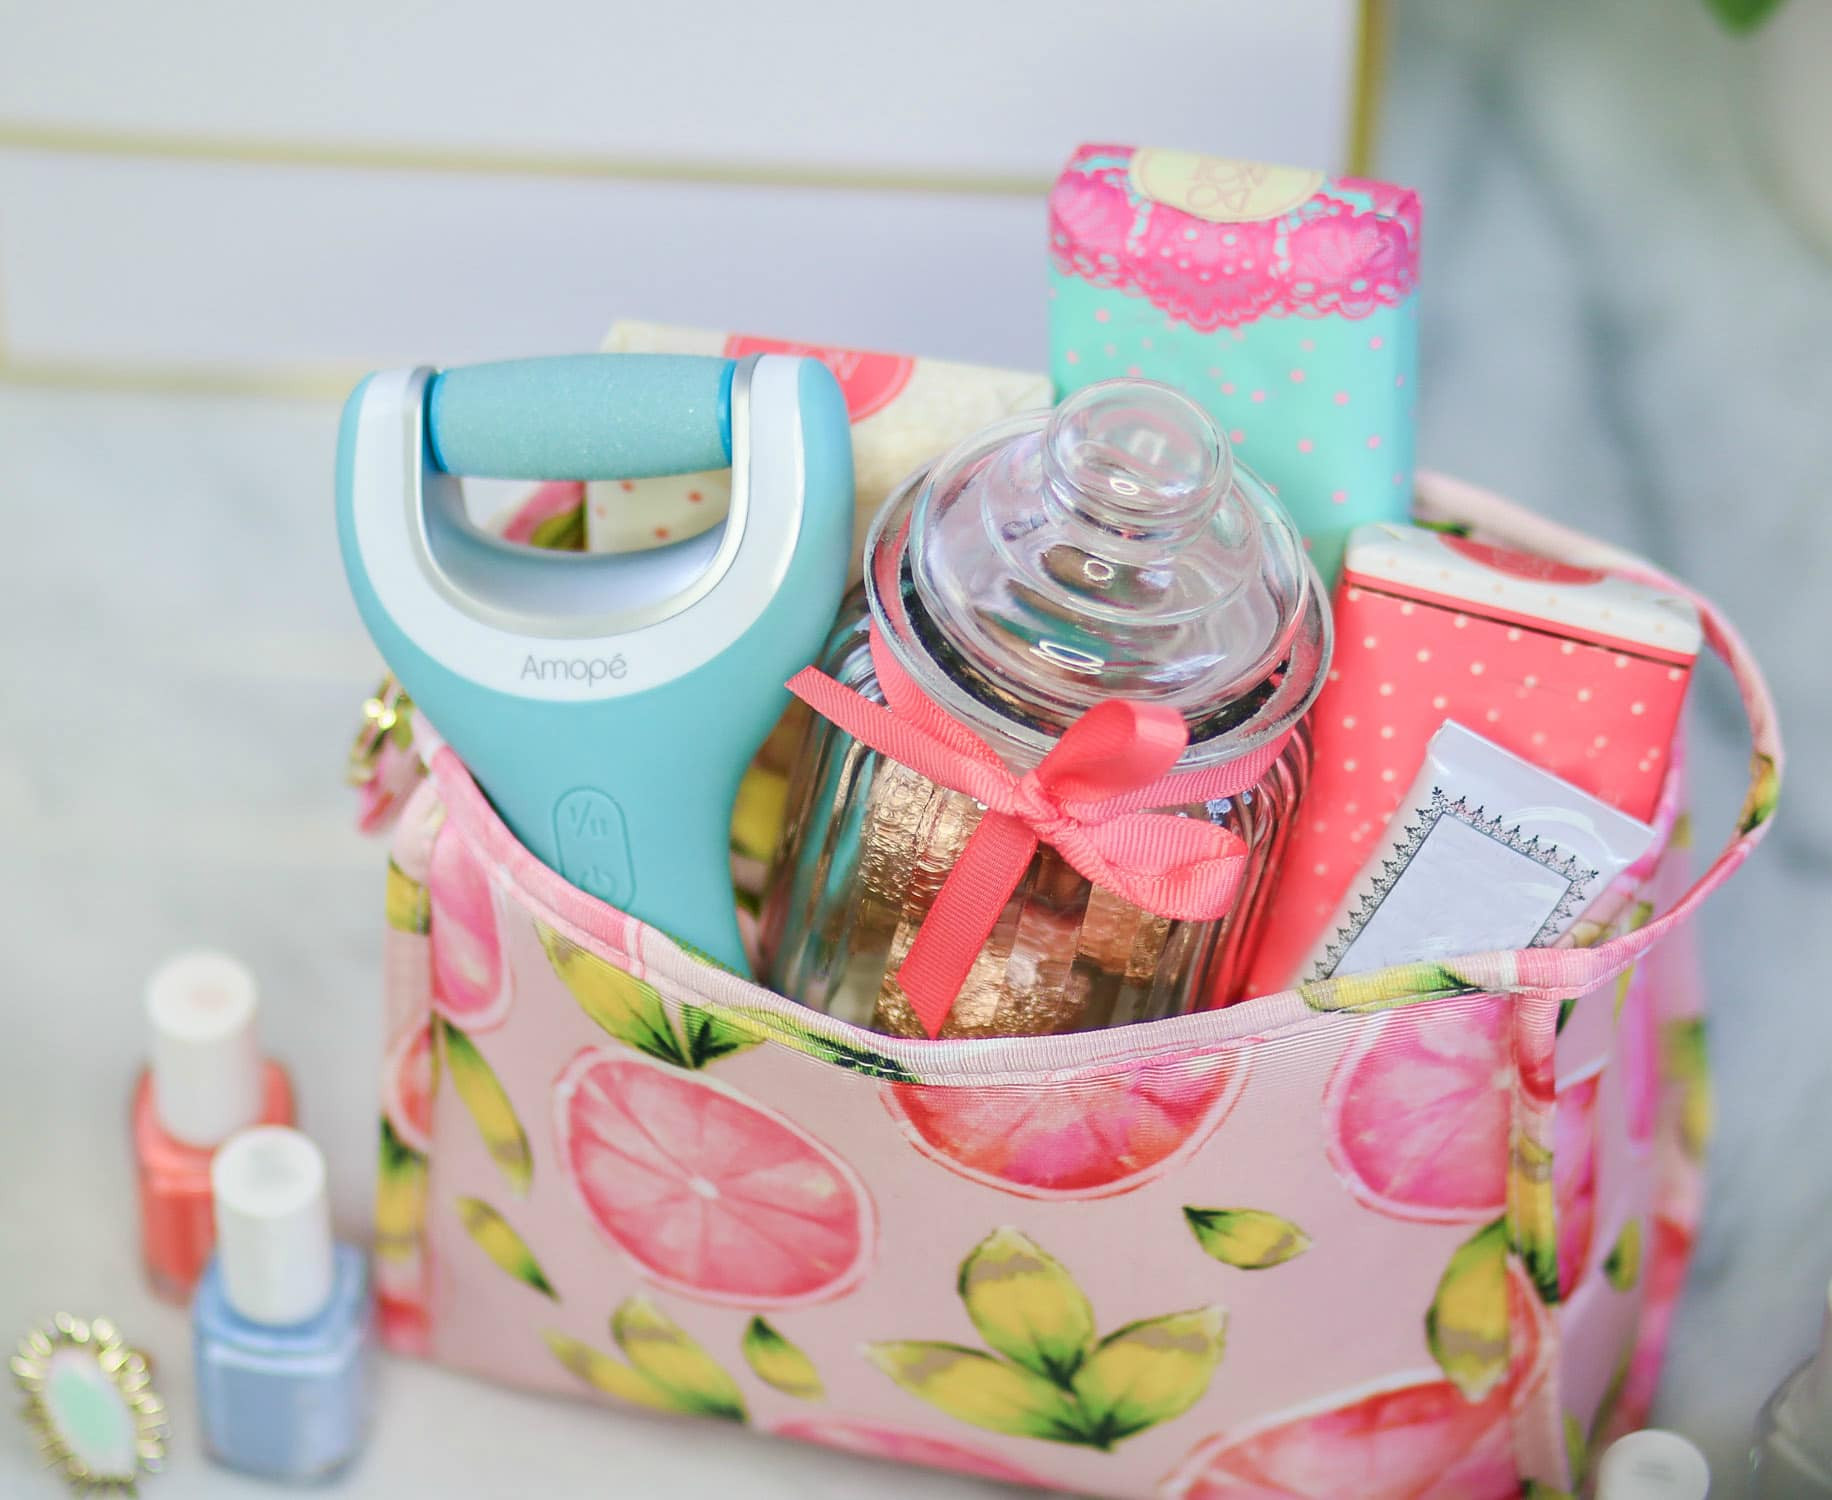 Homemade Gift Ideas For Girls
 Cute Gift Ideas for Your Friends